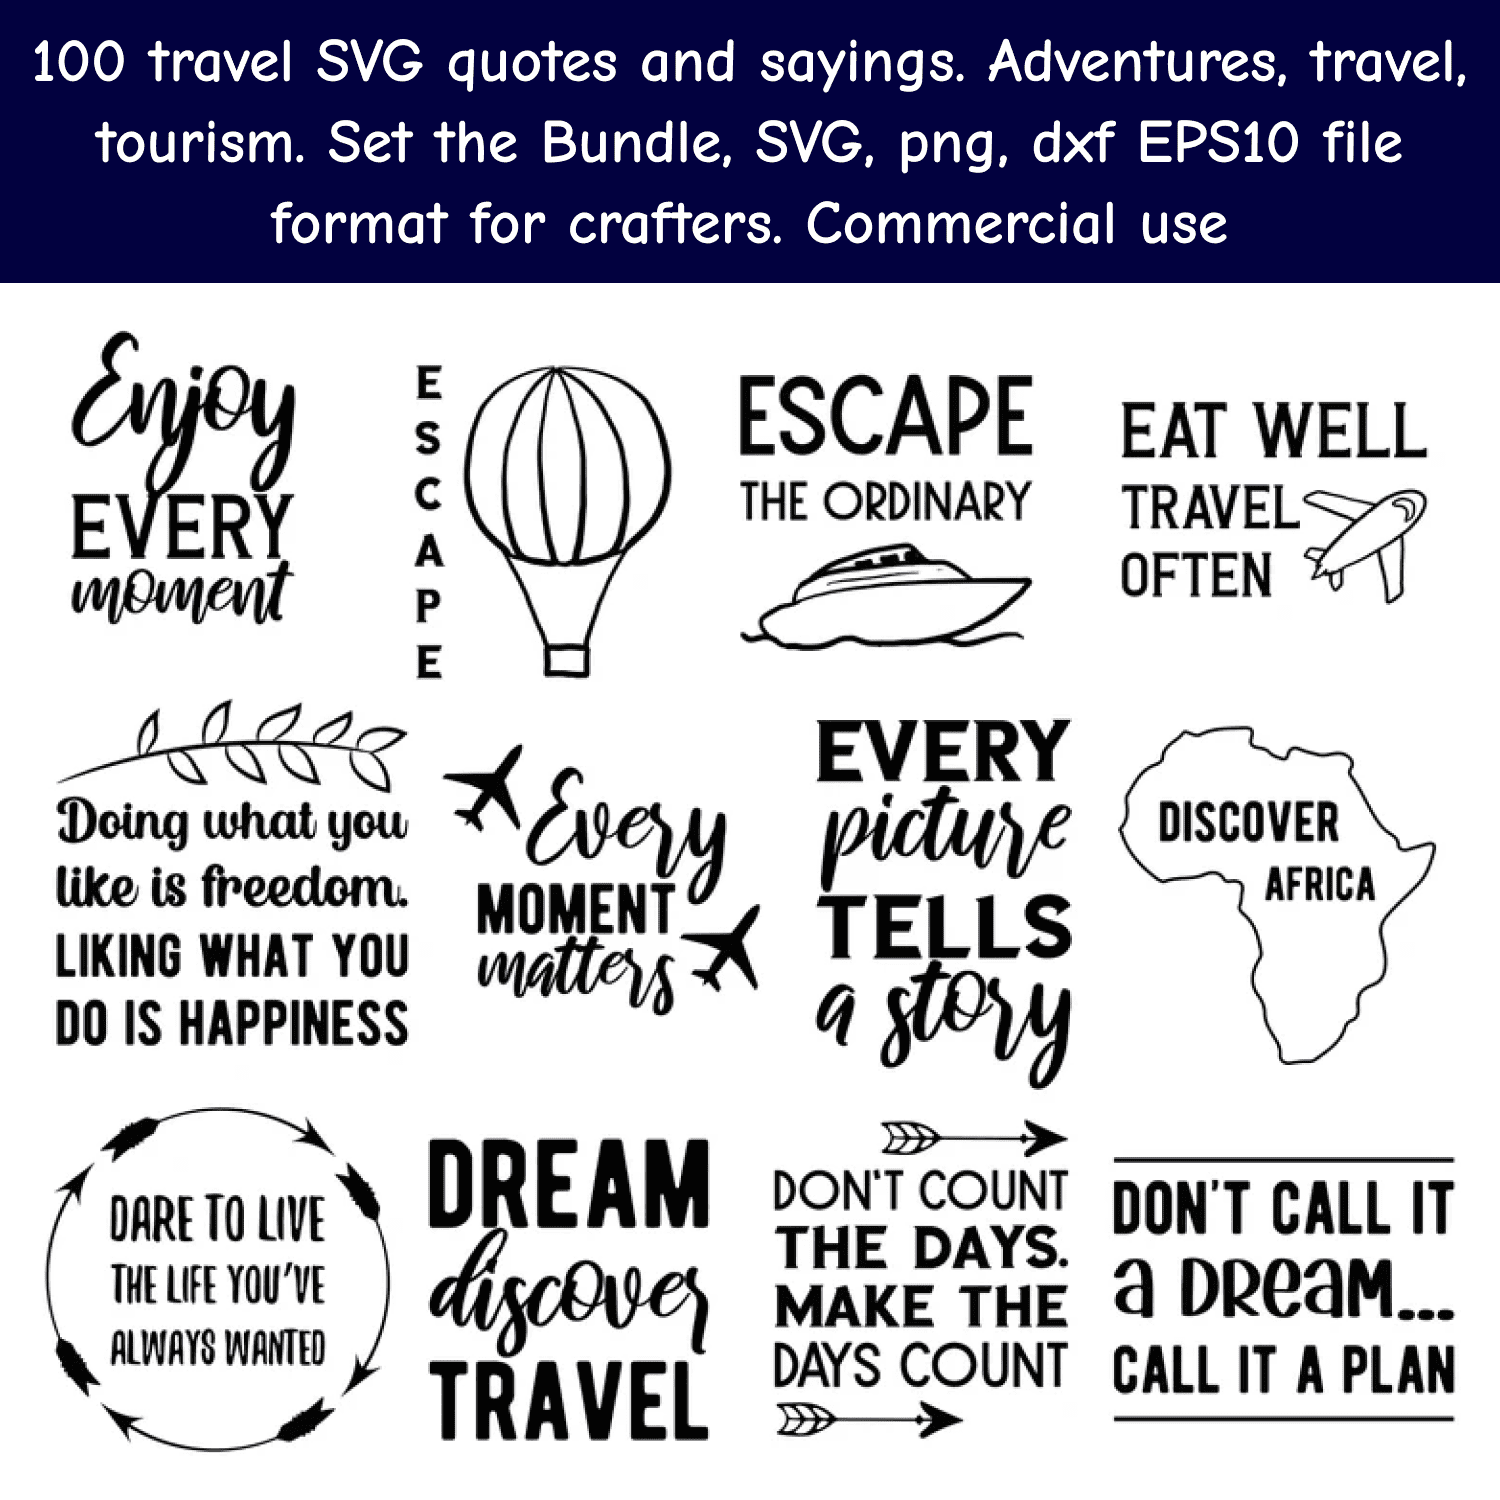 100 Travel SVG Quotes & Sayings.